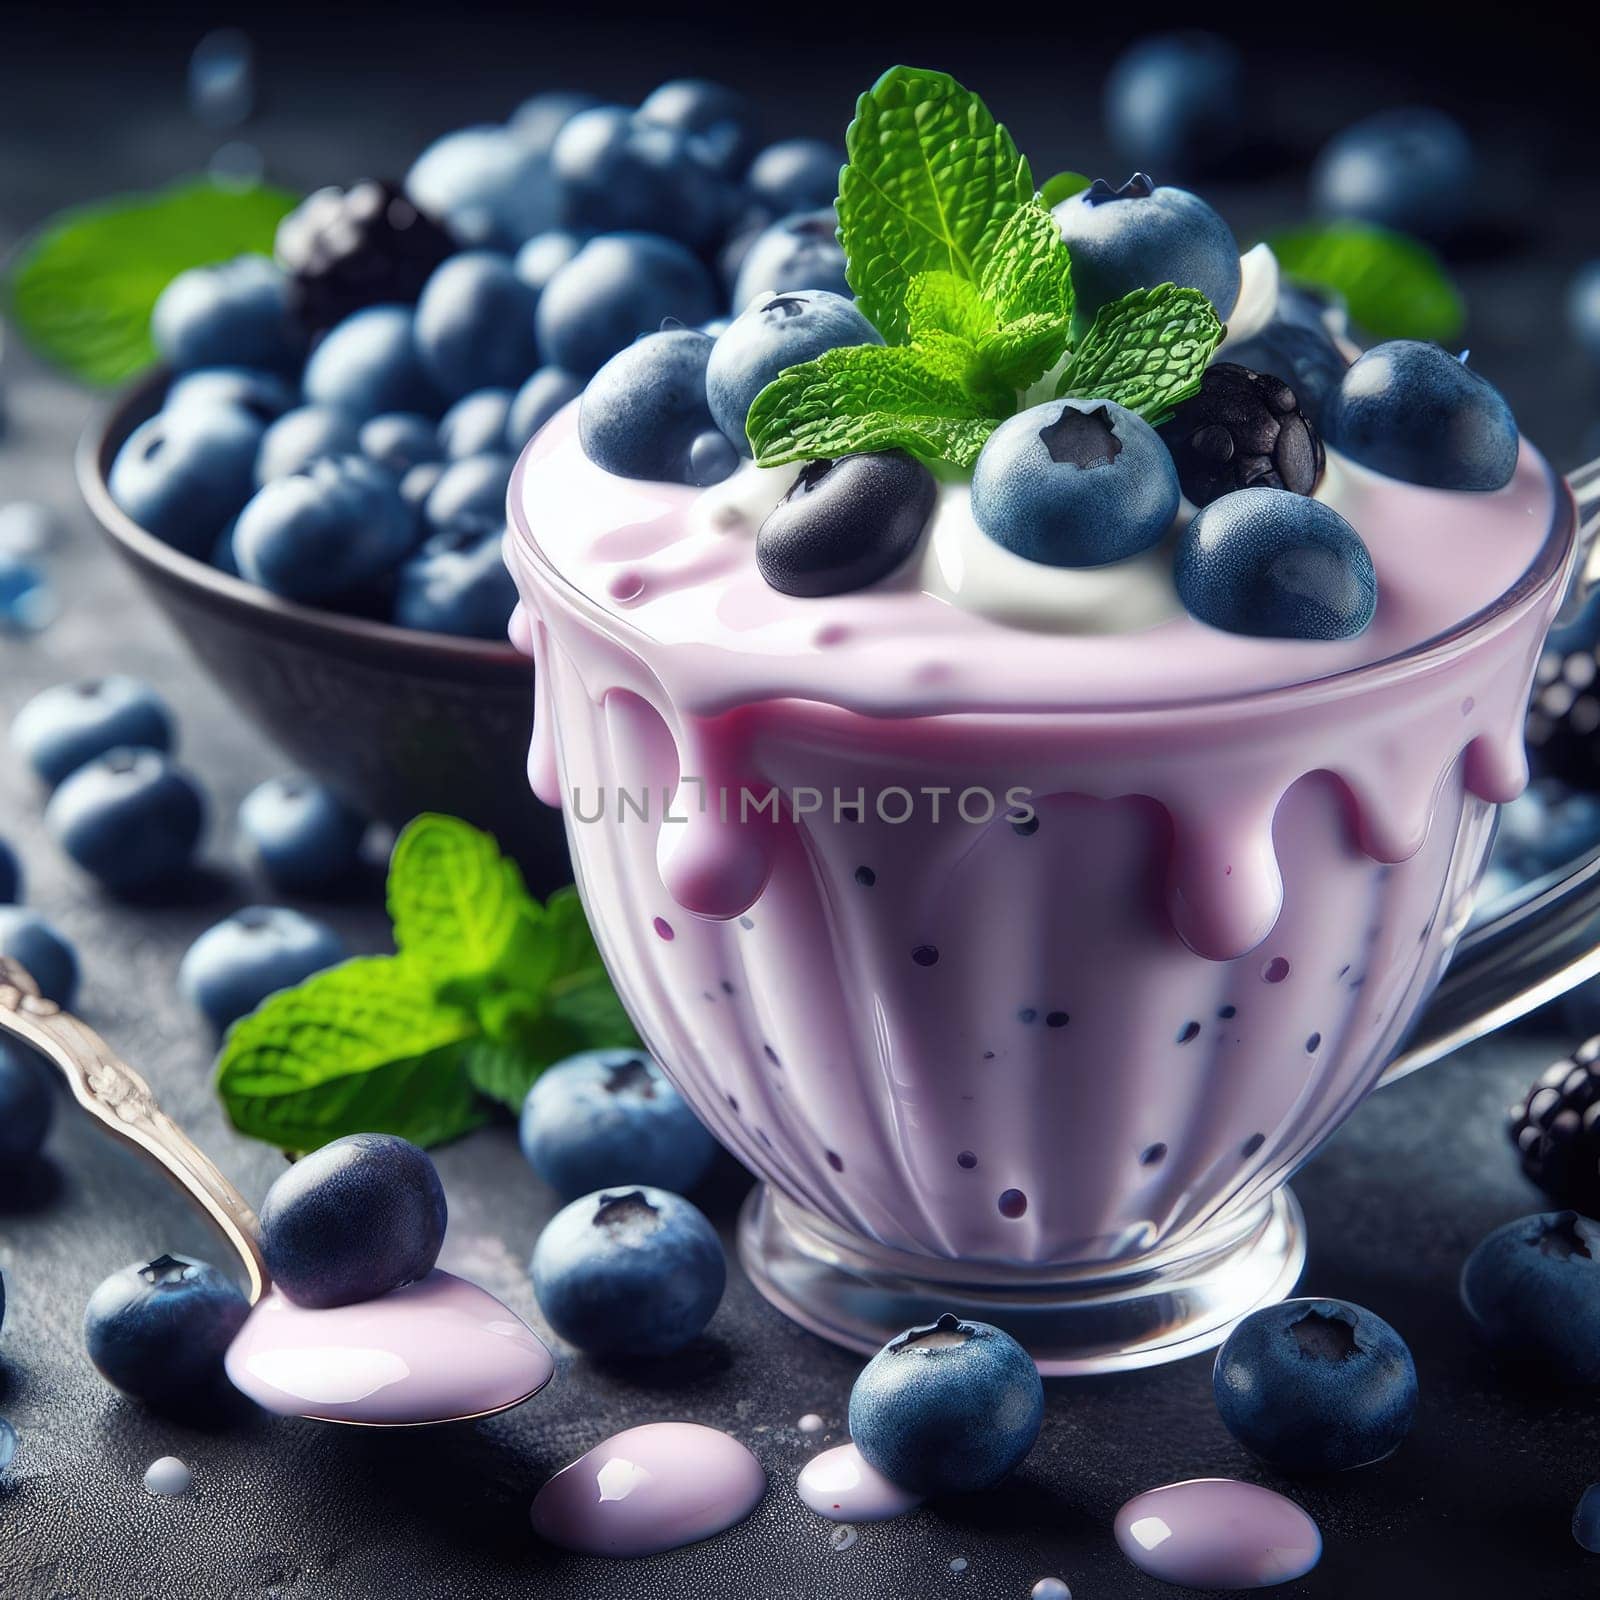 Blueberry yogurt served with fresh blueberries and mint leaves.